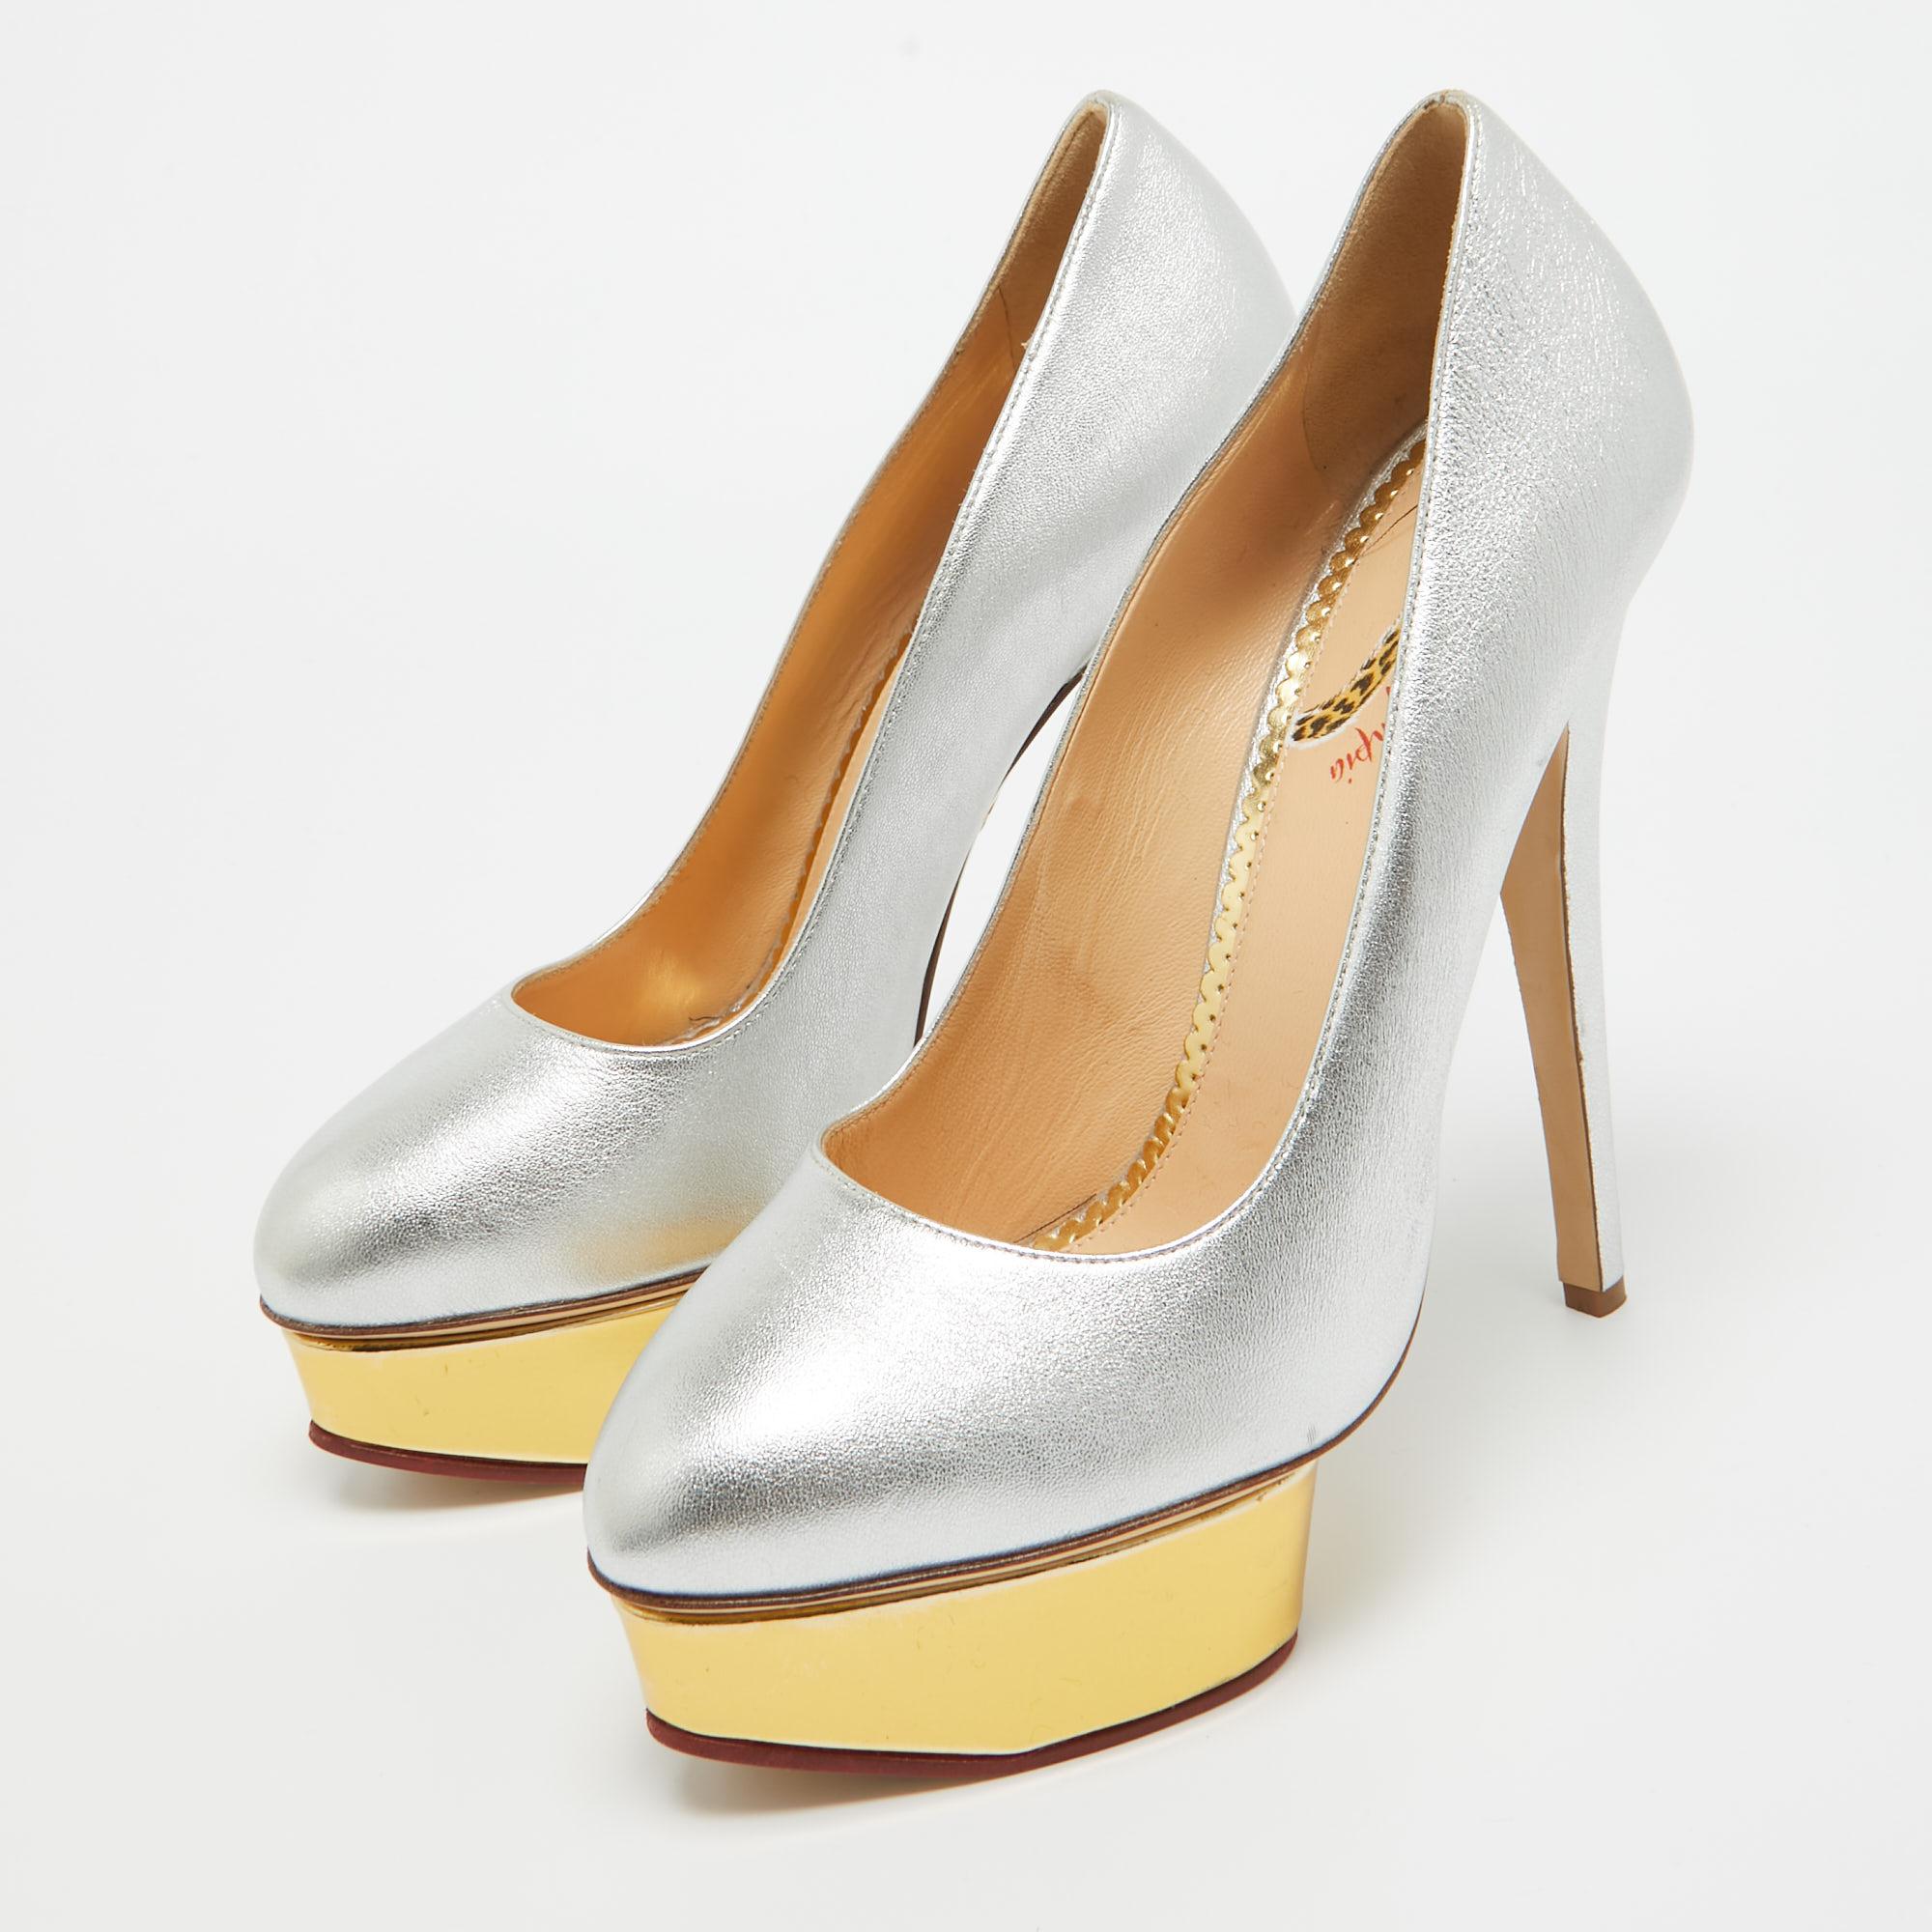 Charlotte Olympia Silver Leather Dolly Platform Pumps Size 40 4